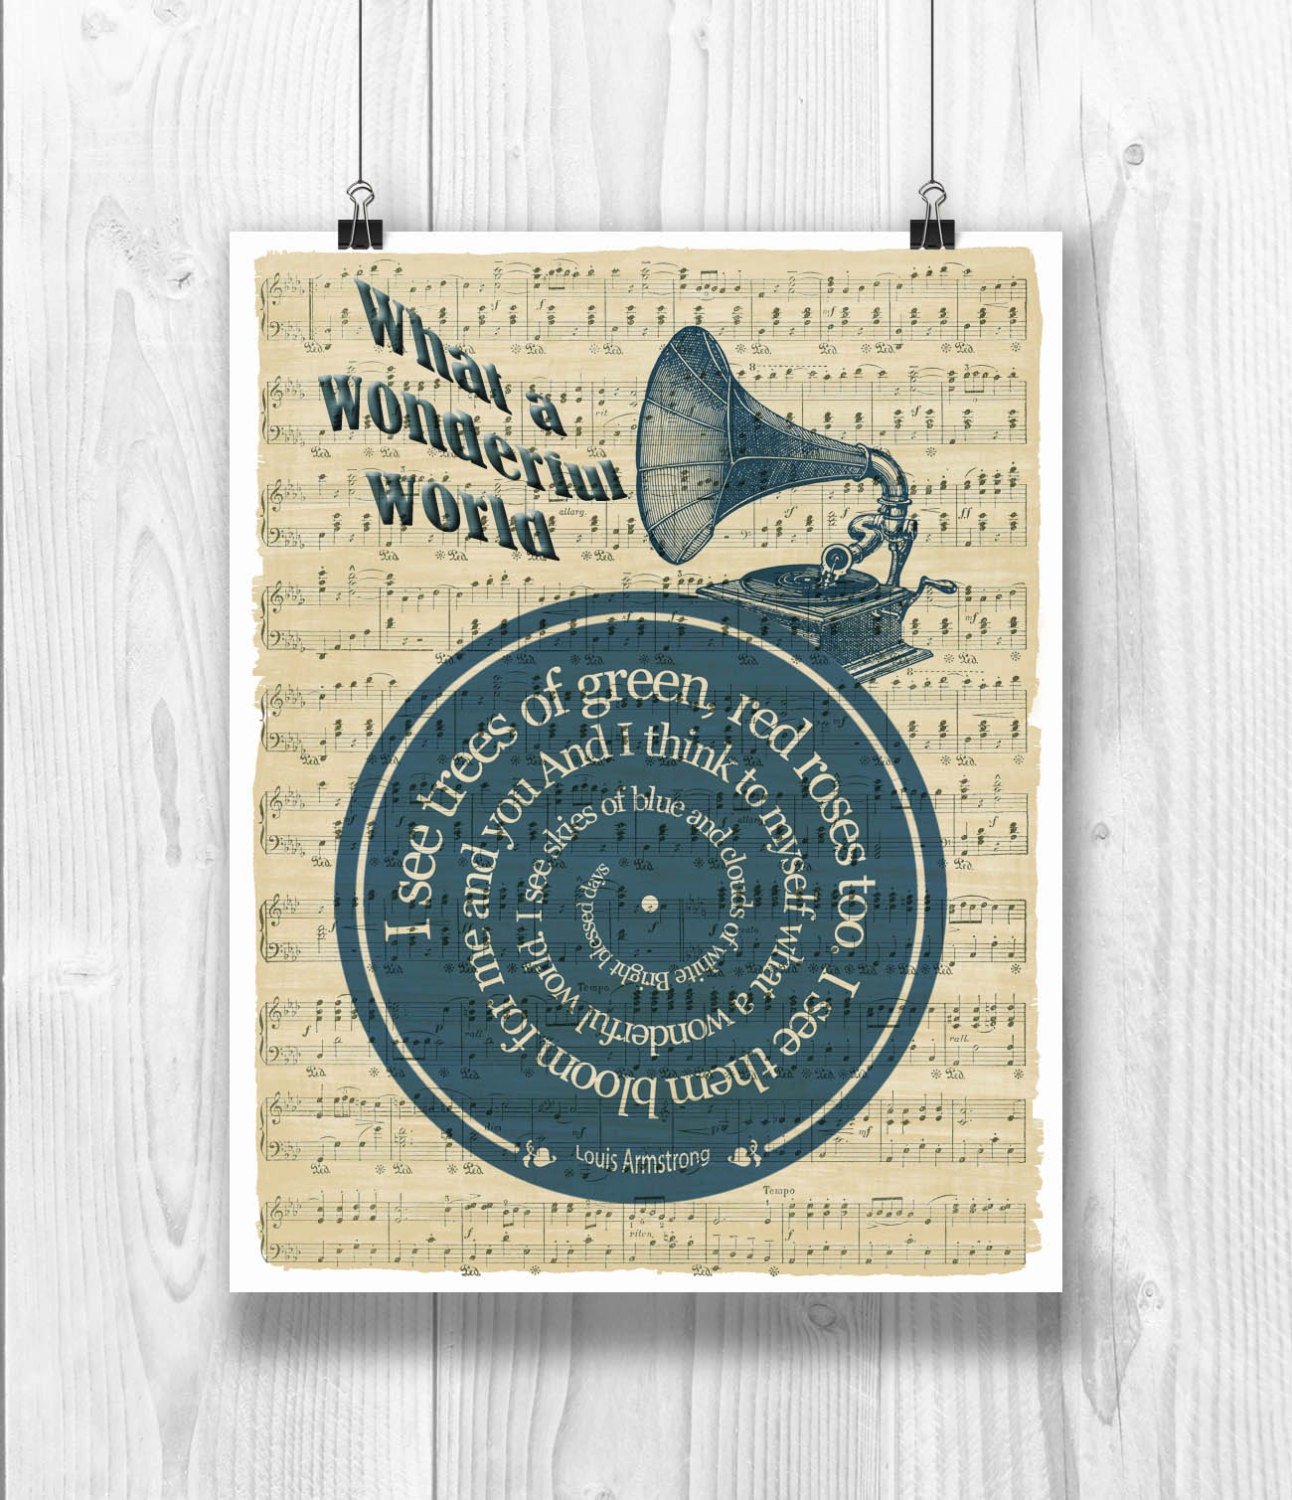 Louis Armstrong Print What a wonderful world Lyrics in